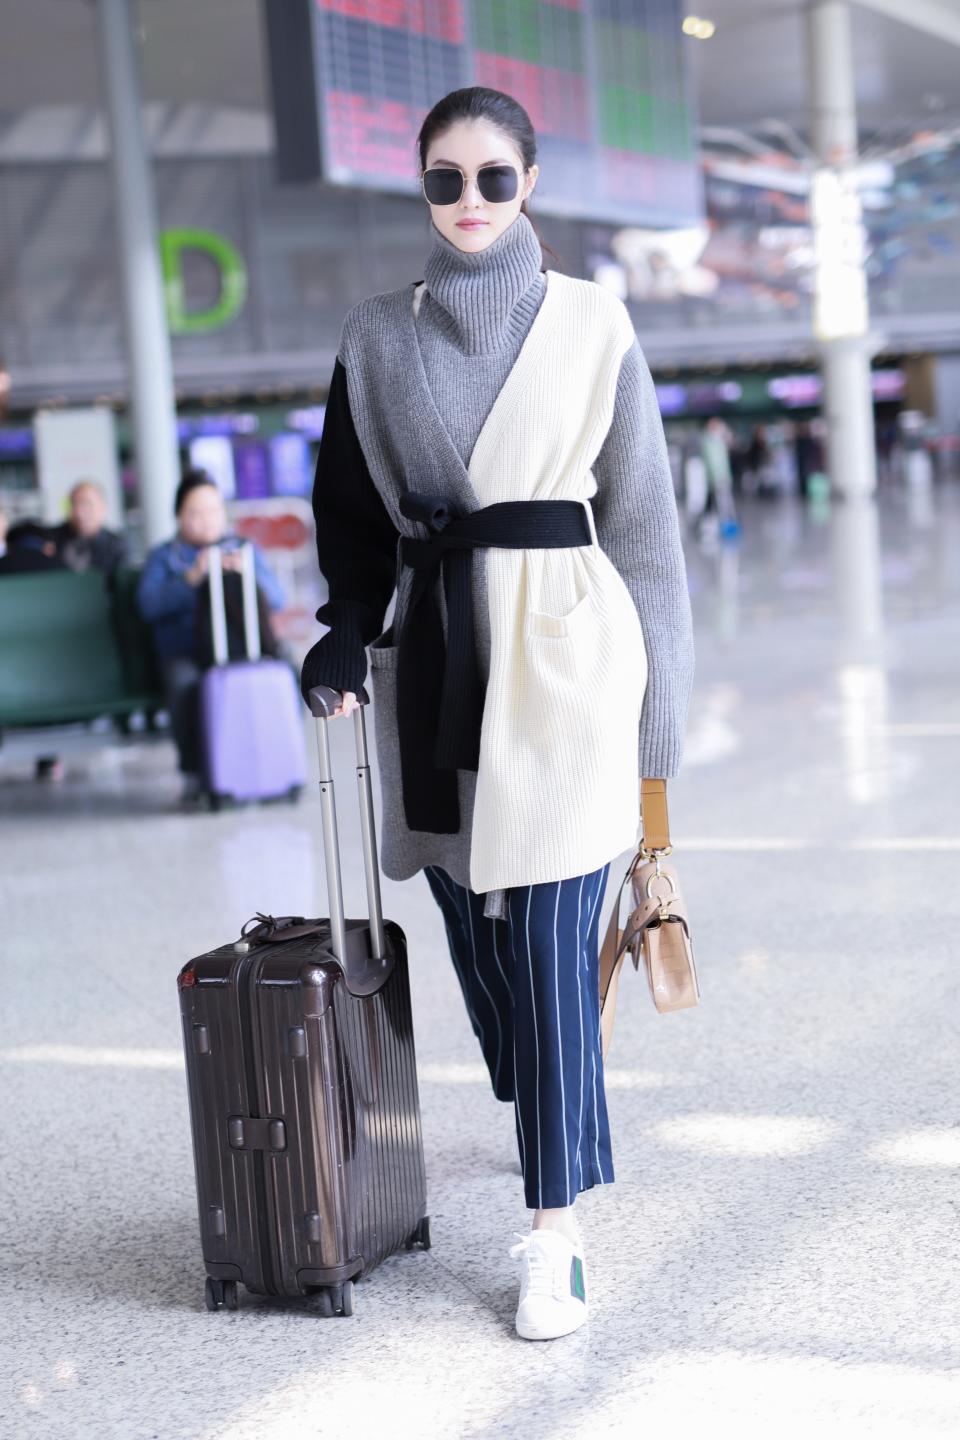 Bundling up for the airplane has never been so chic. With an oversize cardigan, funnel-neck sweater, and pajama suiting pants, you're ready—and comfortable—for transit.